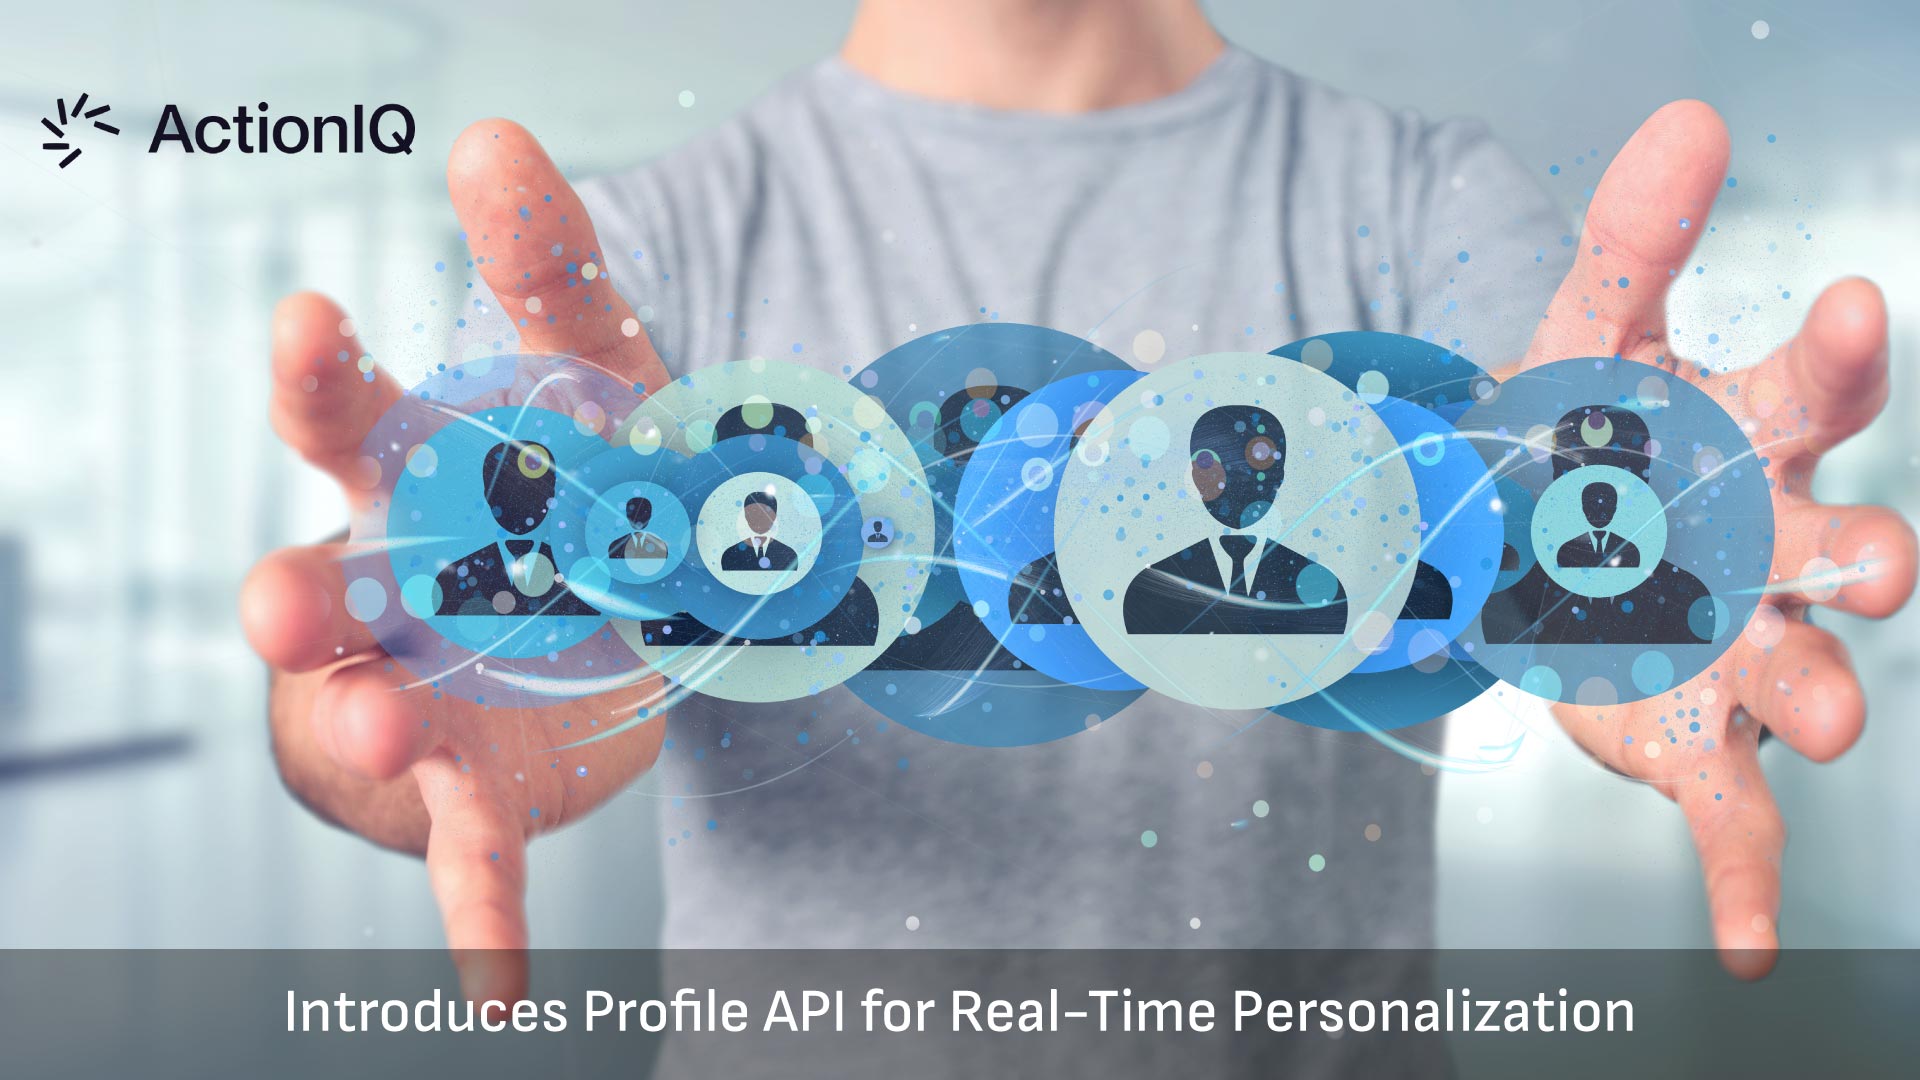 ActionIQ Introduces Profile API for Real-Time Personalization, Connecting the Data Warehouse to The Customer Experience